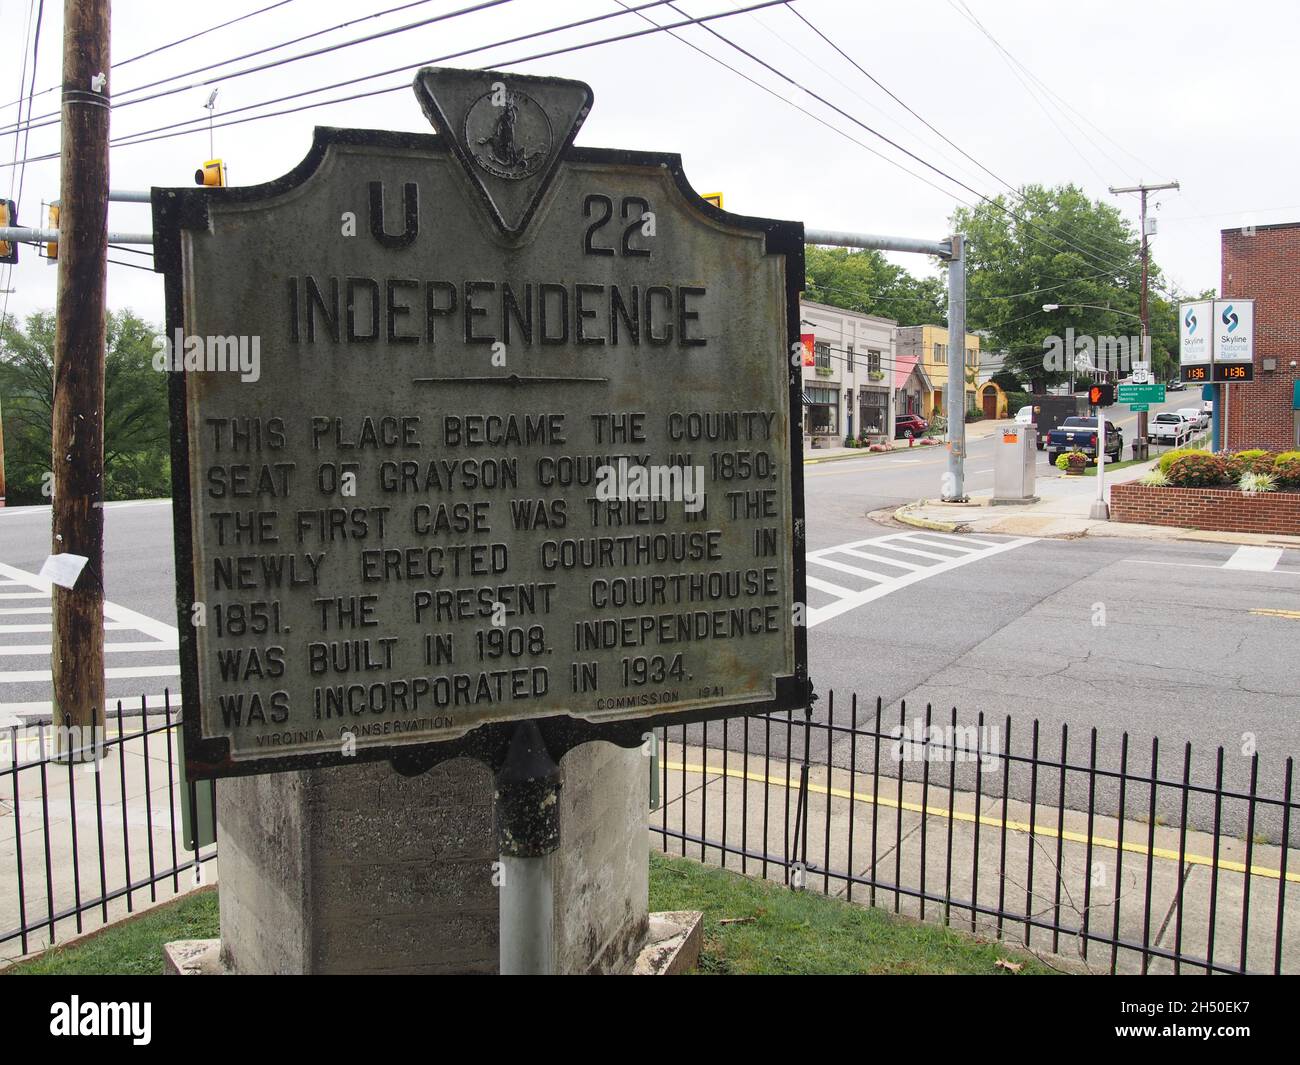 Plaque marking the town and some history of Independence, Virginia, and the location and history of its courthouse, USA 2021 © Katharine Andriotis Stock Photo